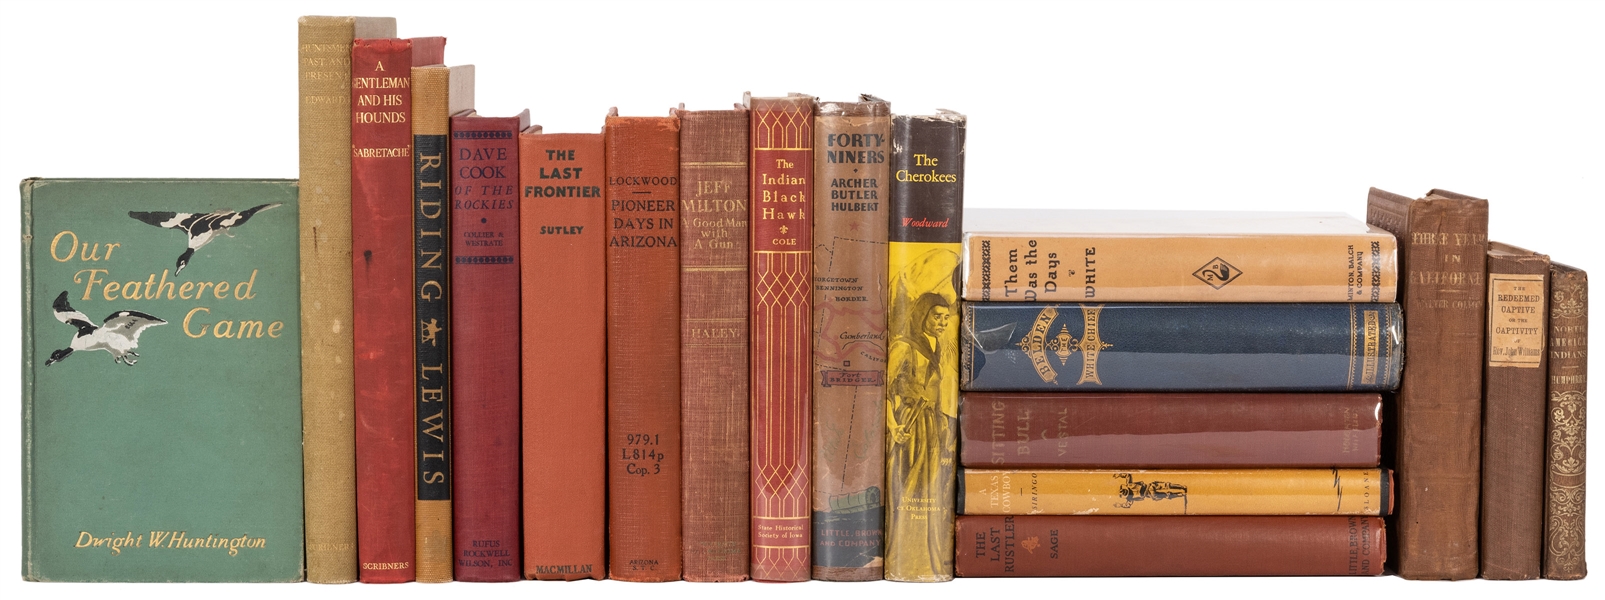  [WESTERN AMERICANA] A Shelf of 19 Volumes Related to Wester...